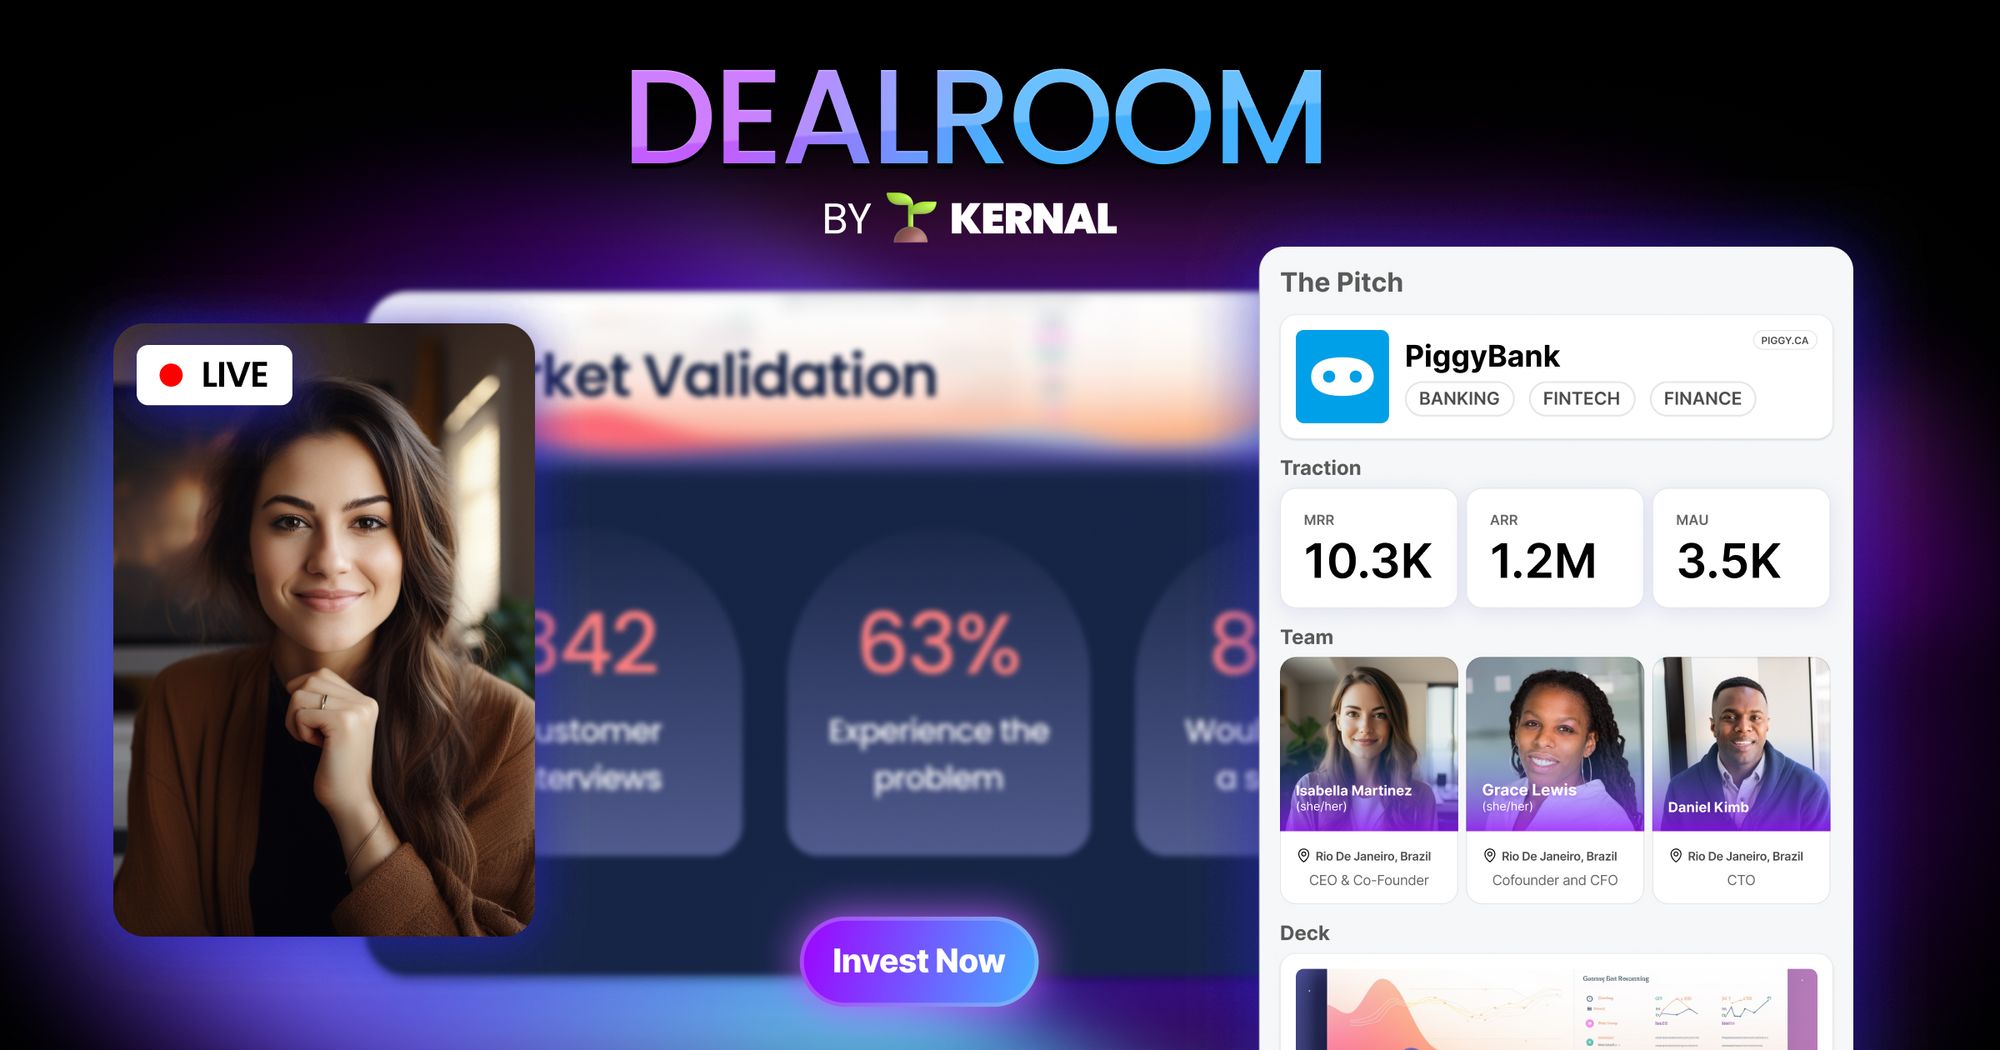 💸 Introducing Kernal Dealroom: The Future of Interactive Demo Days